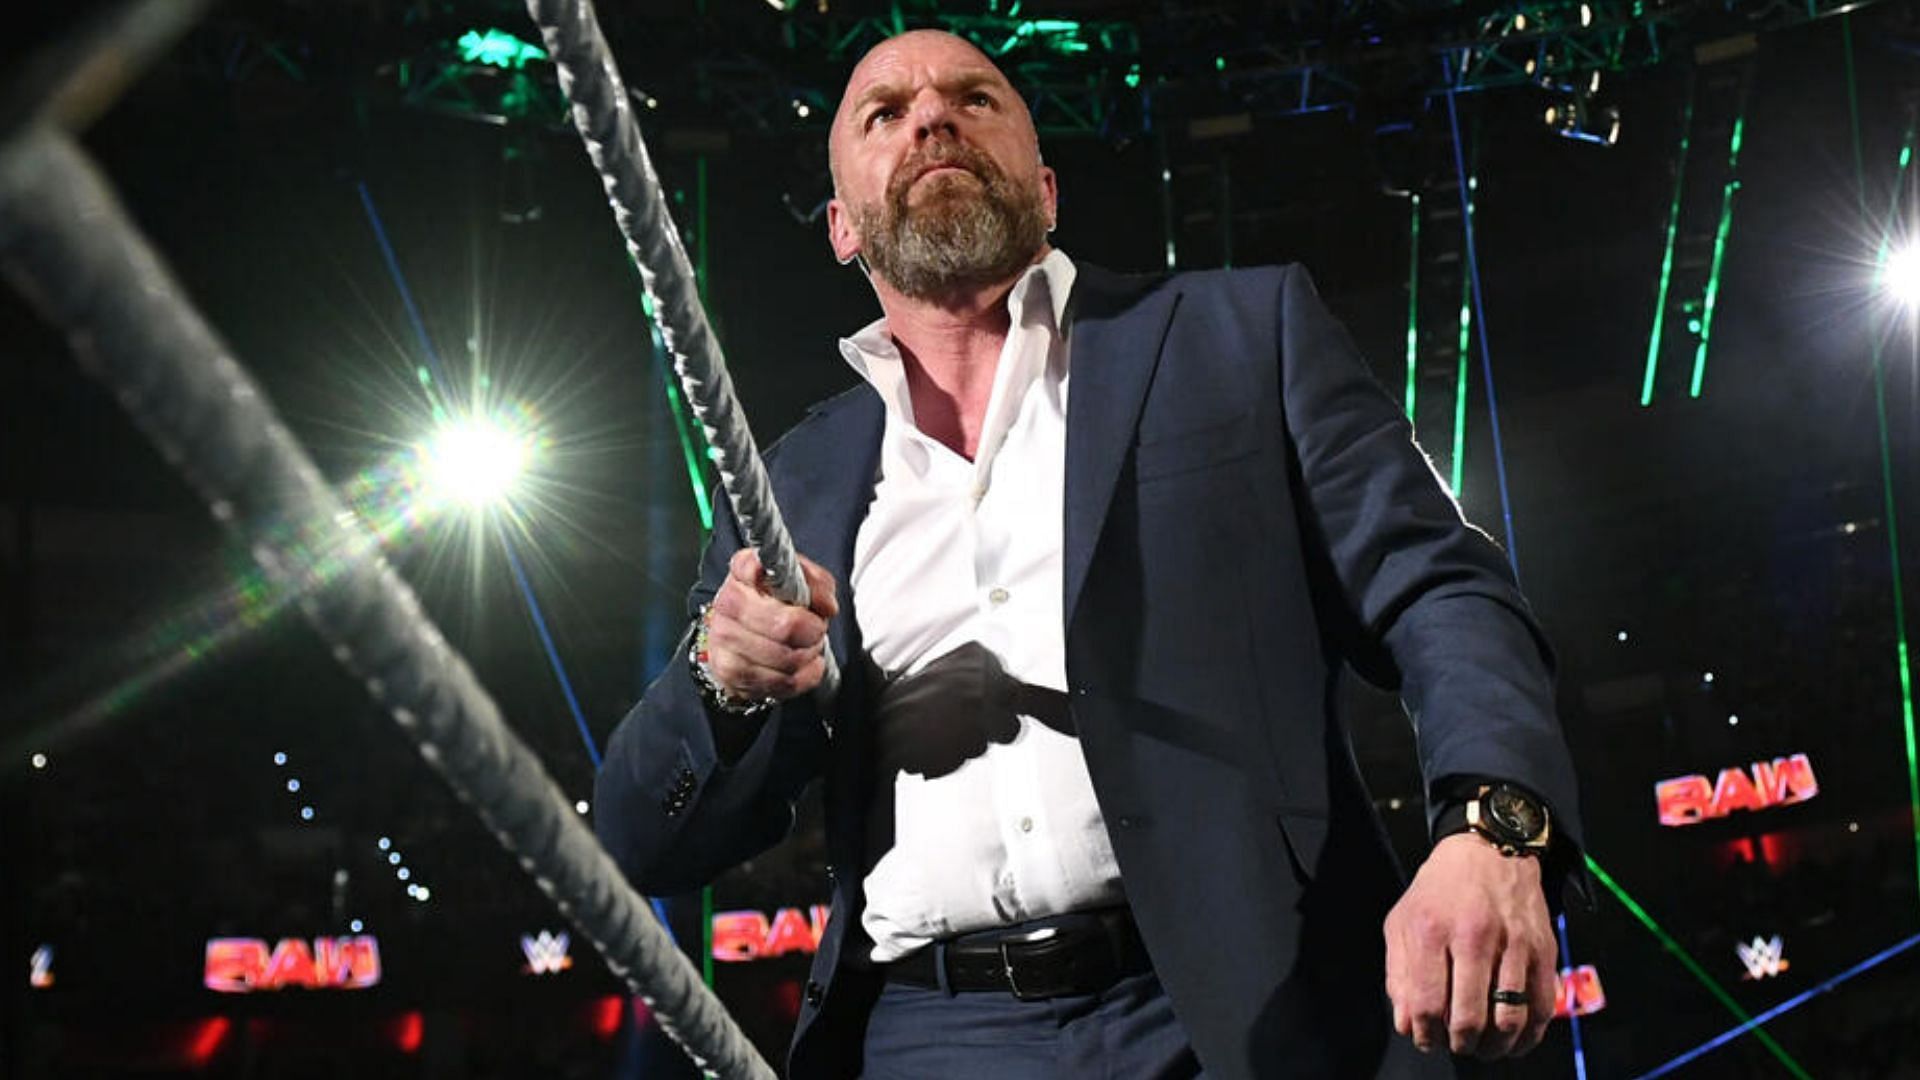 Triple H has done a great job with the new era thus far